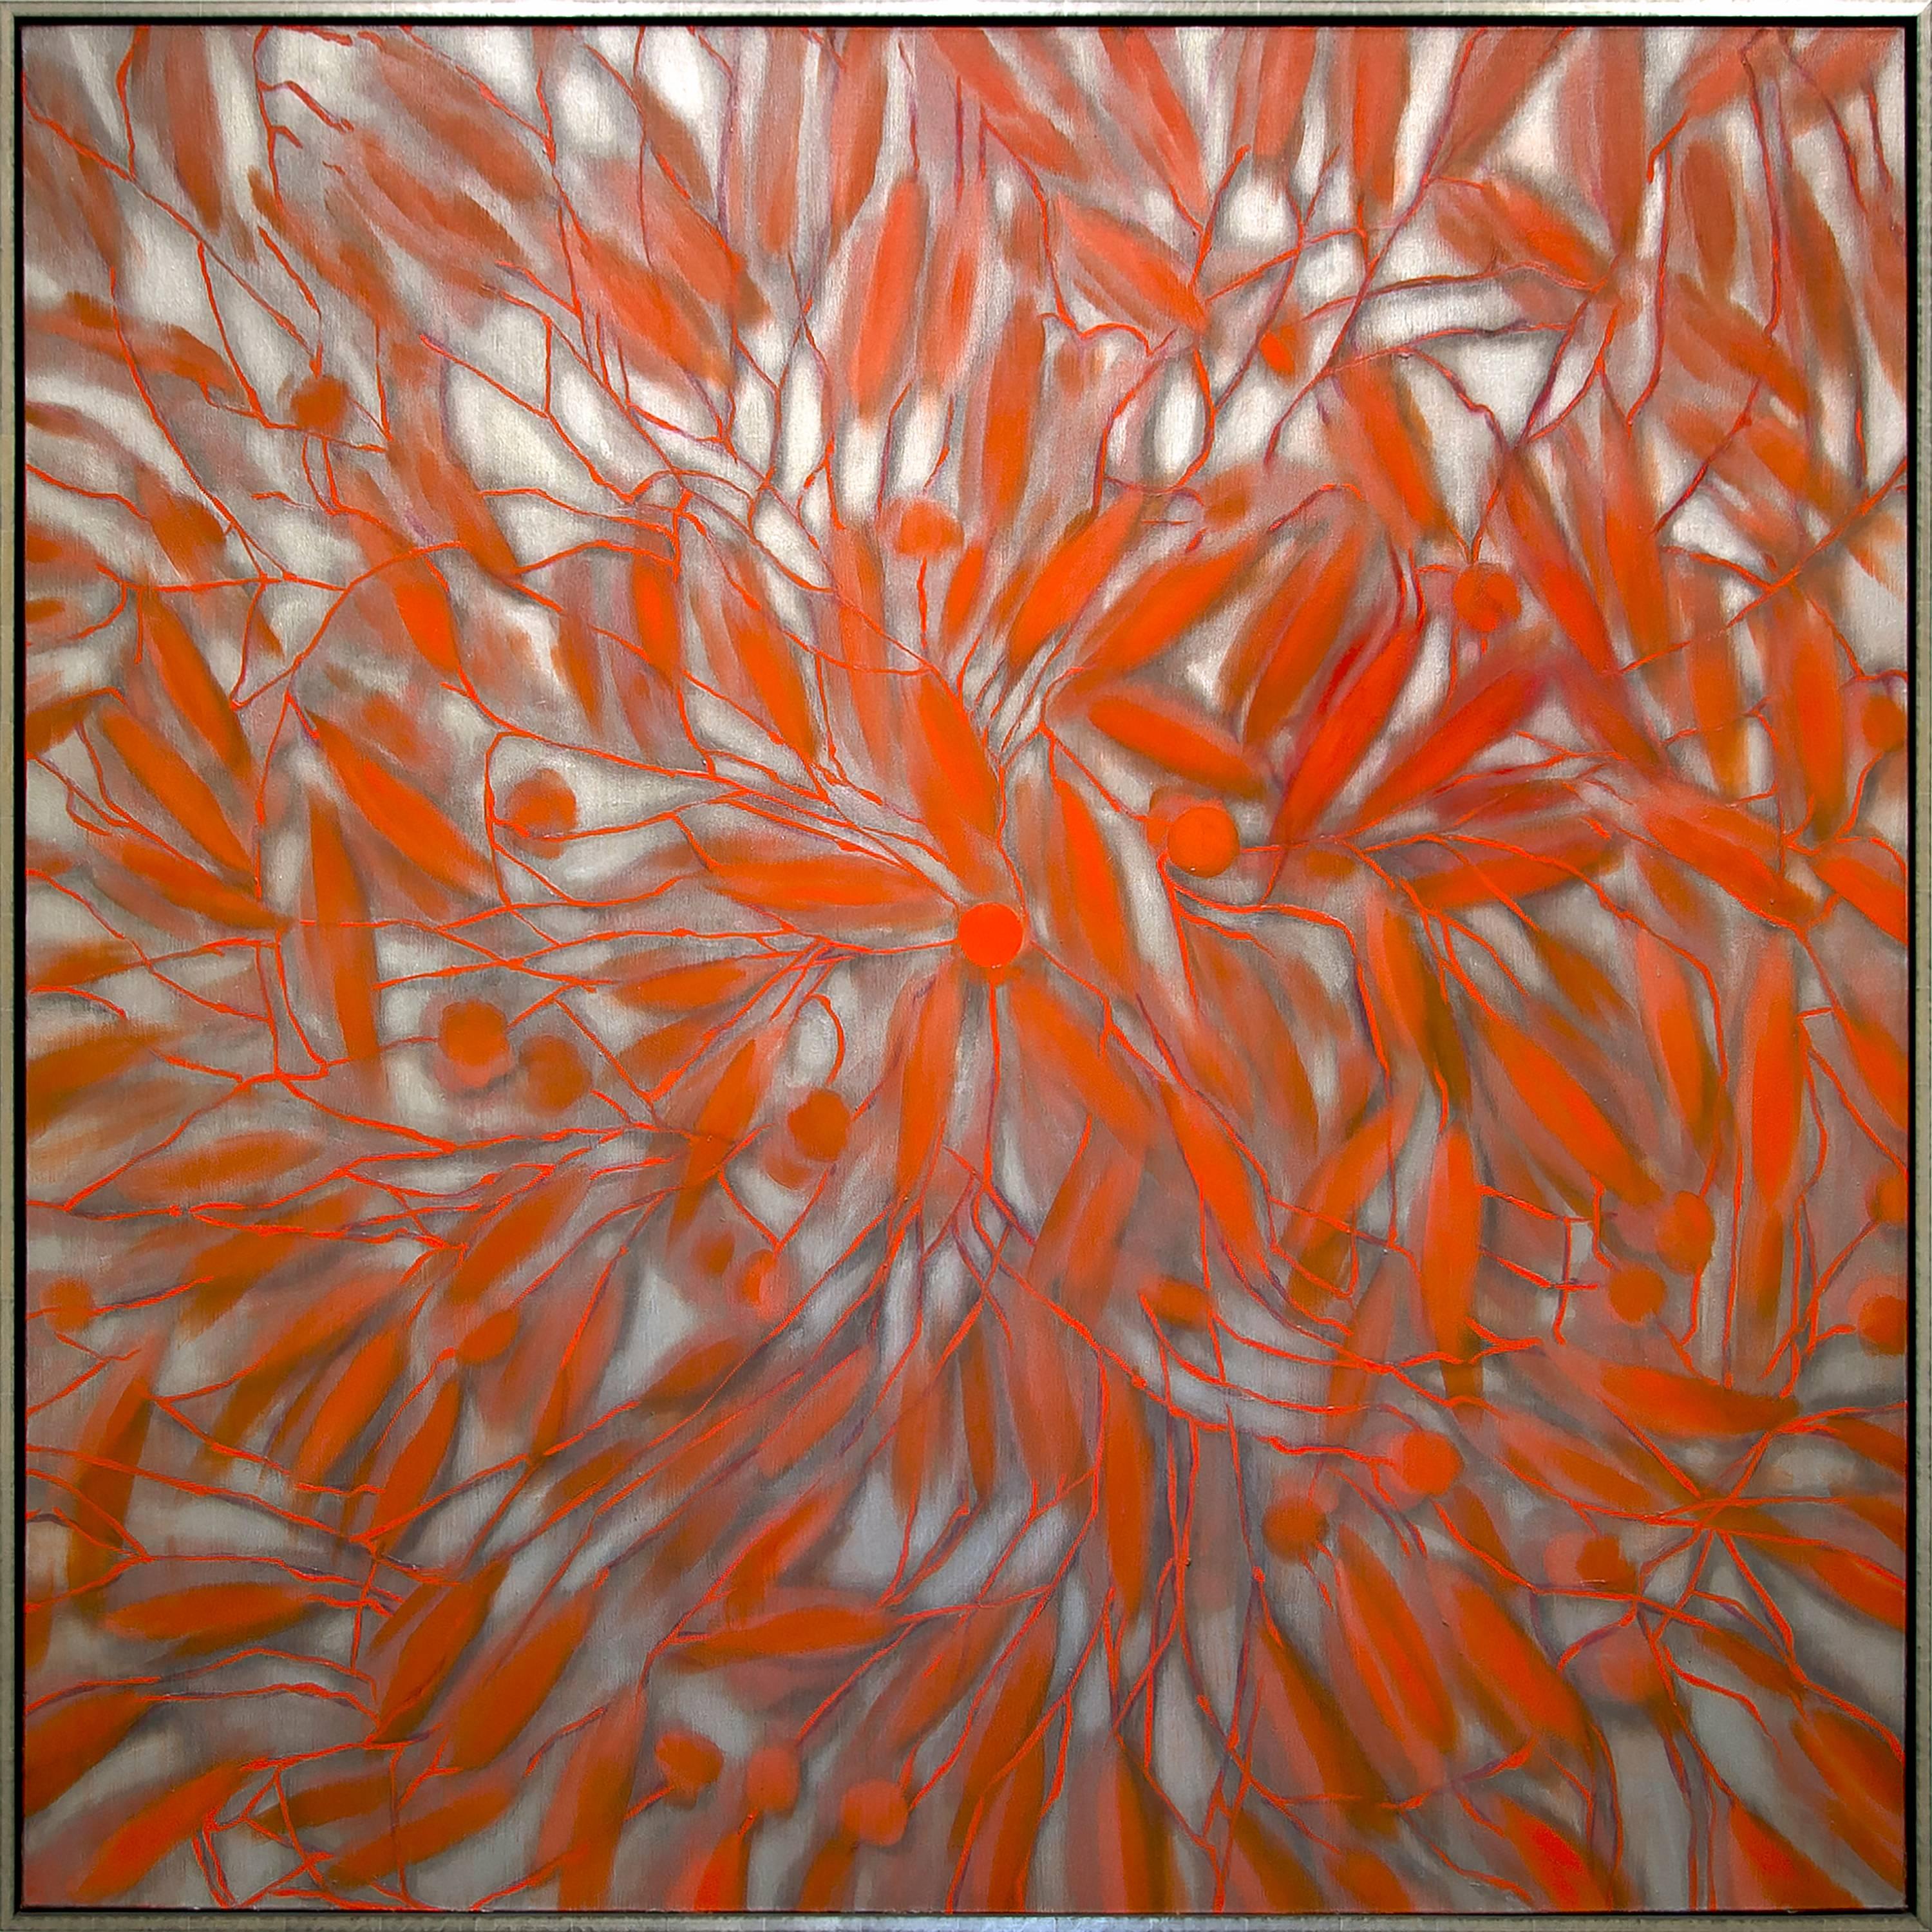 West to East - Painting by Ross Bleckner